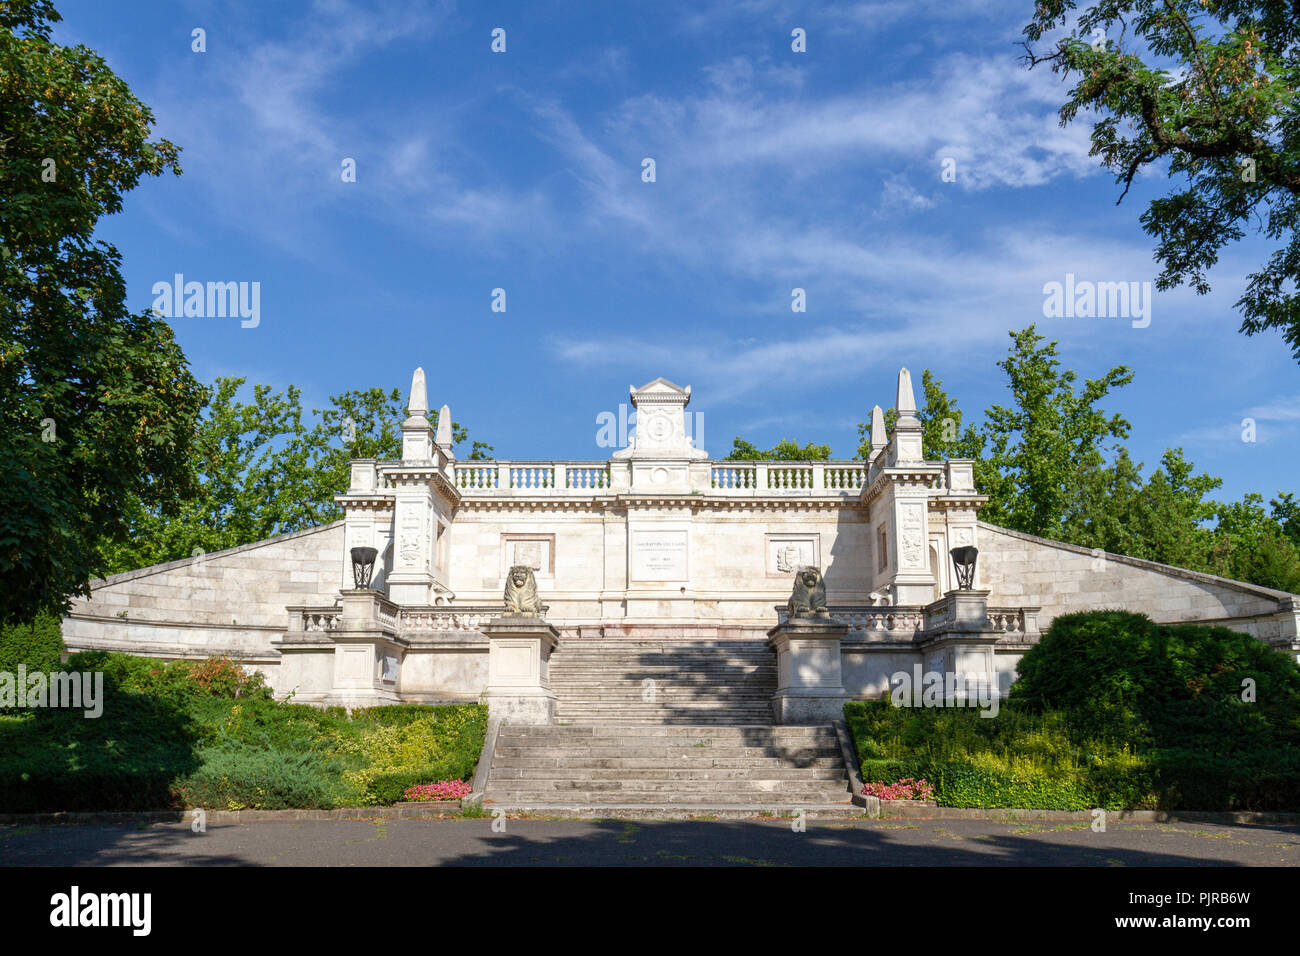 The Lajos Batthyány Mausoleum in the Kerepesi Cemetery (Fiume Road National Graveyard), Budapest, Hungary. Stock Photo